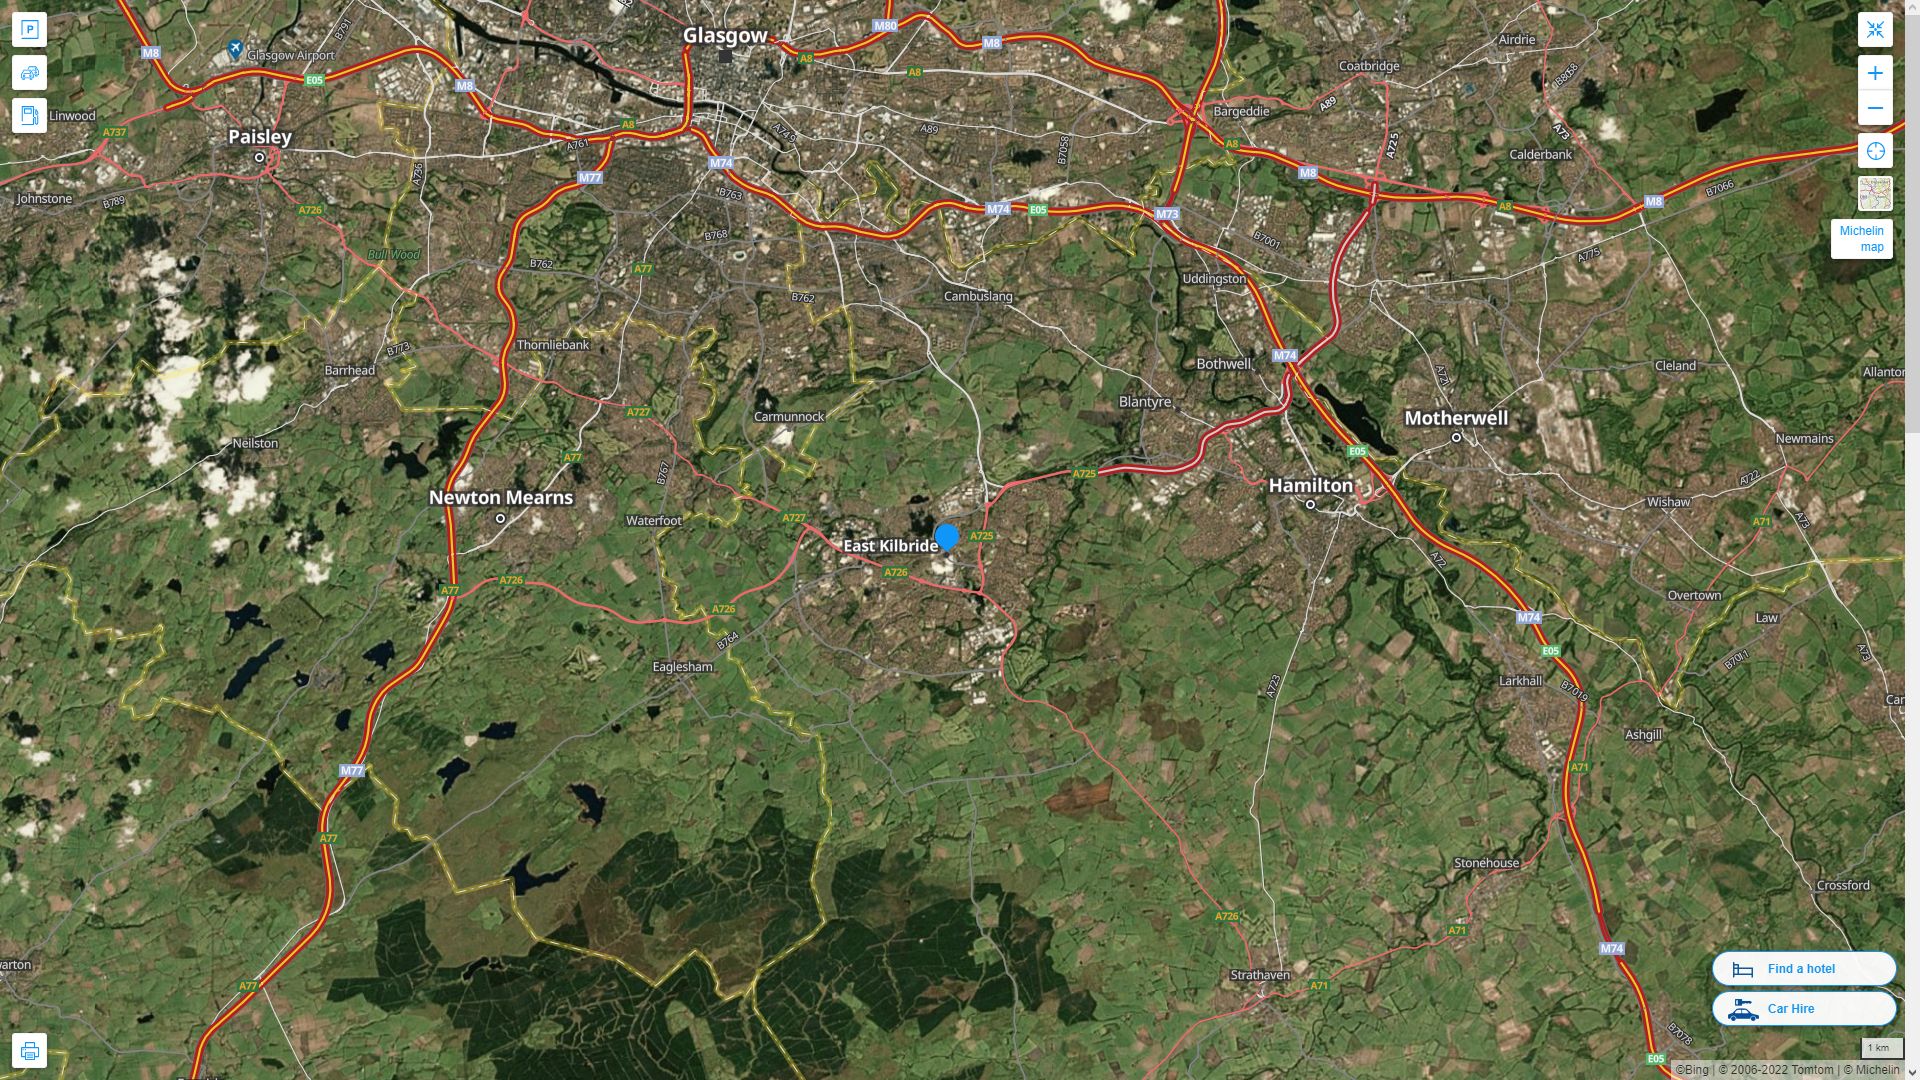 East Kilbride Highway and Road Map with Satellite View